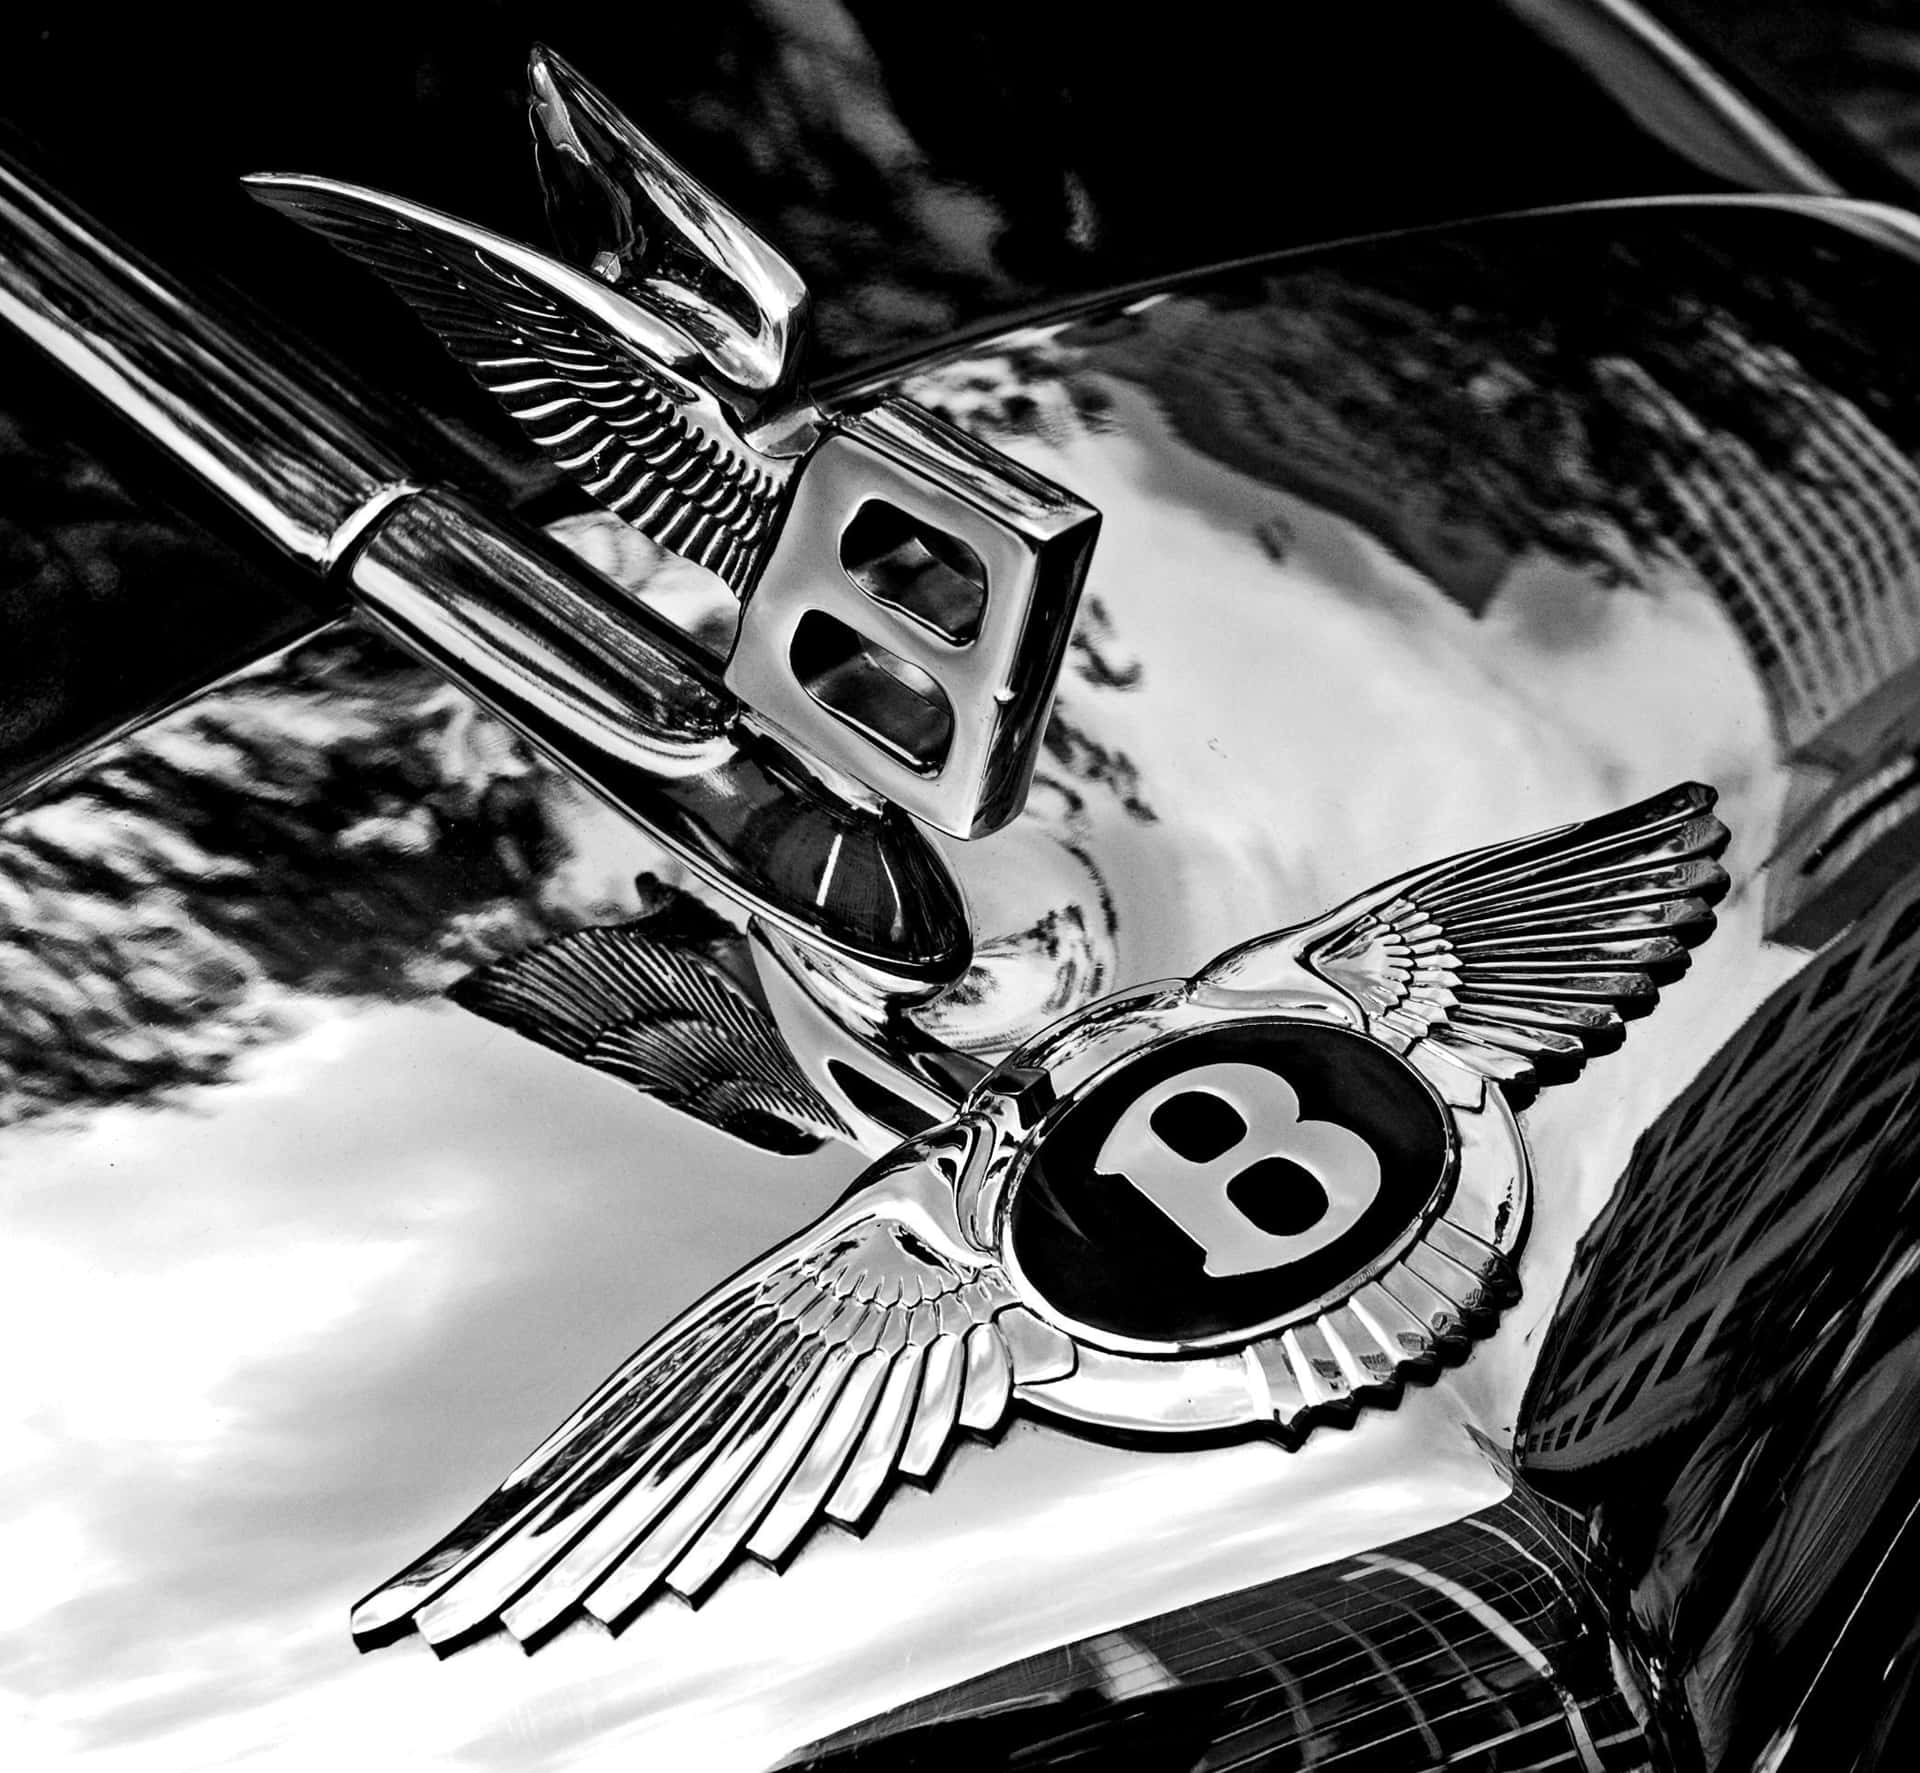 Luksusi Sin Ypperste Form: Bentley Continental.